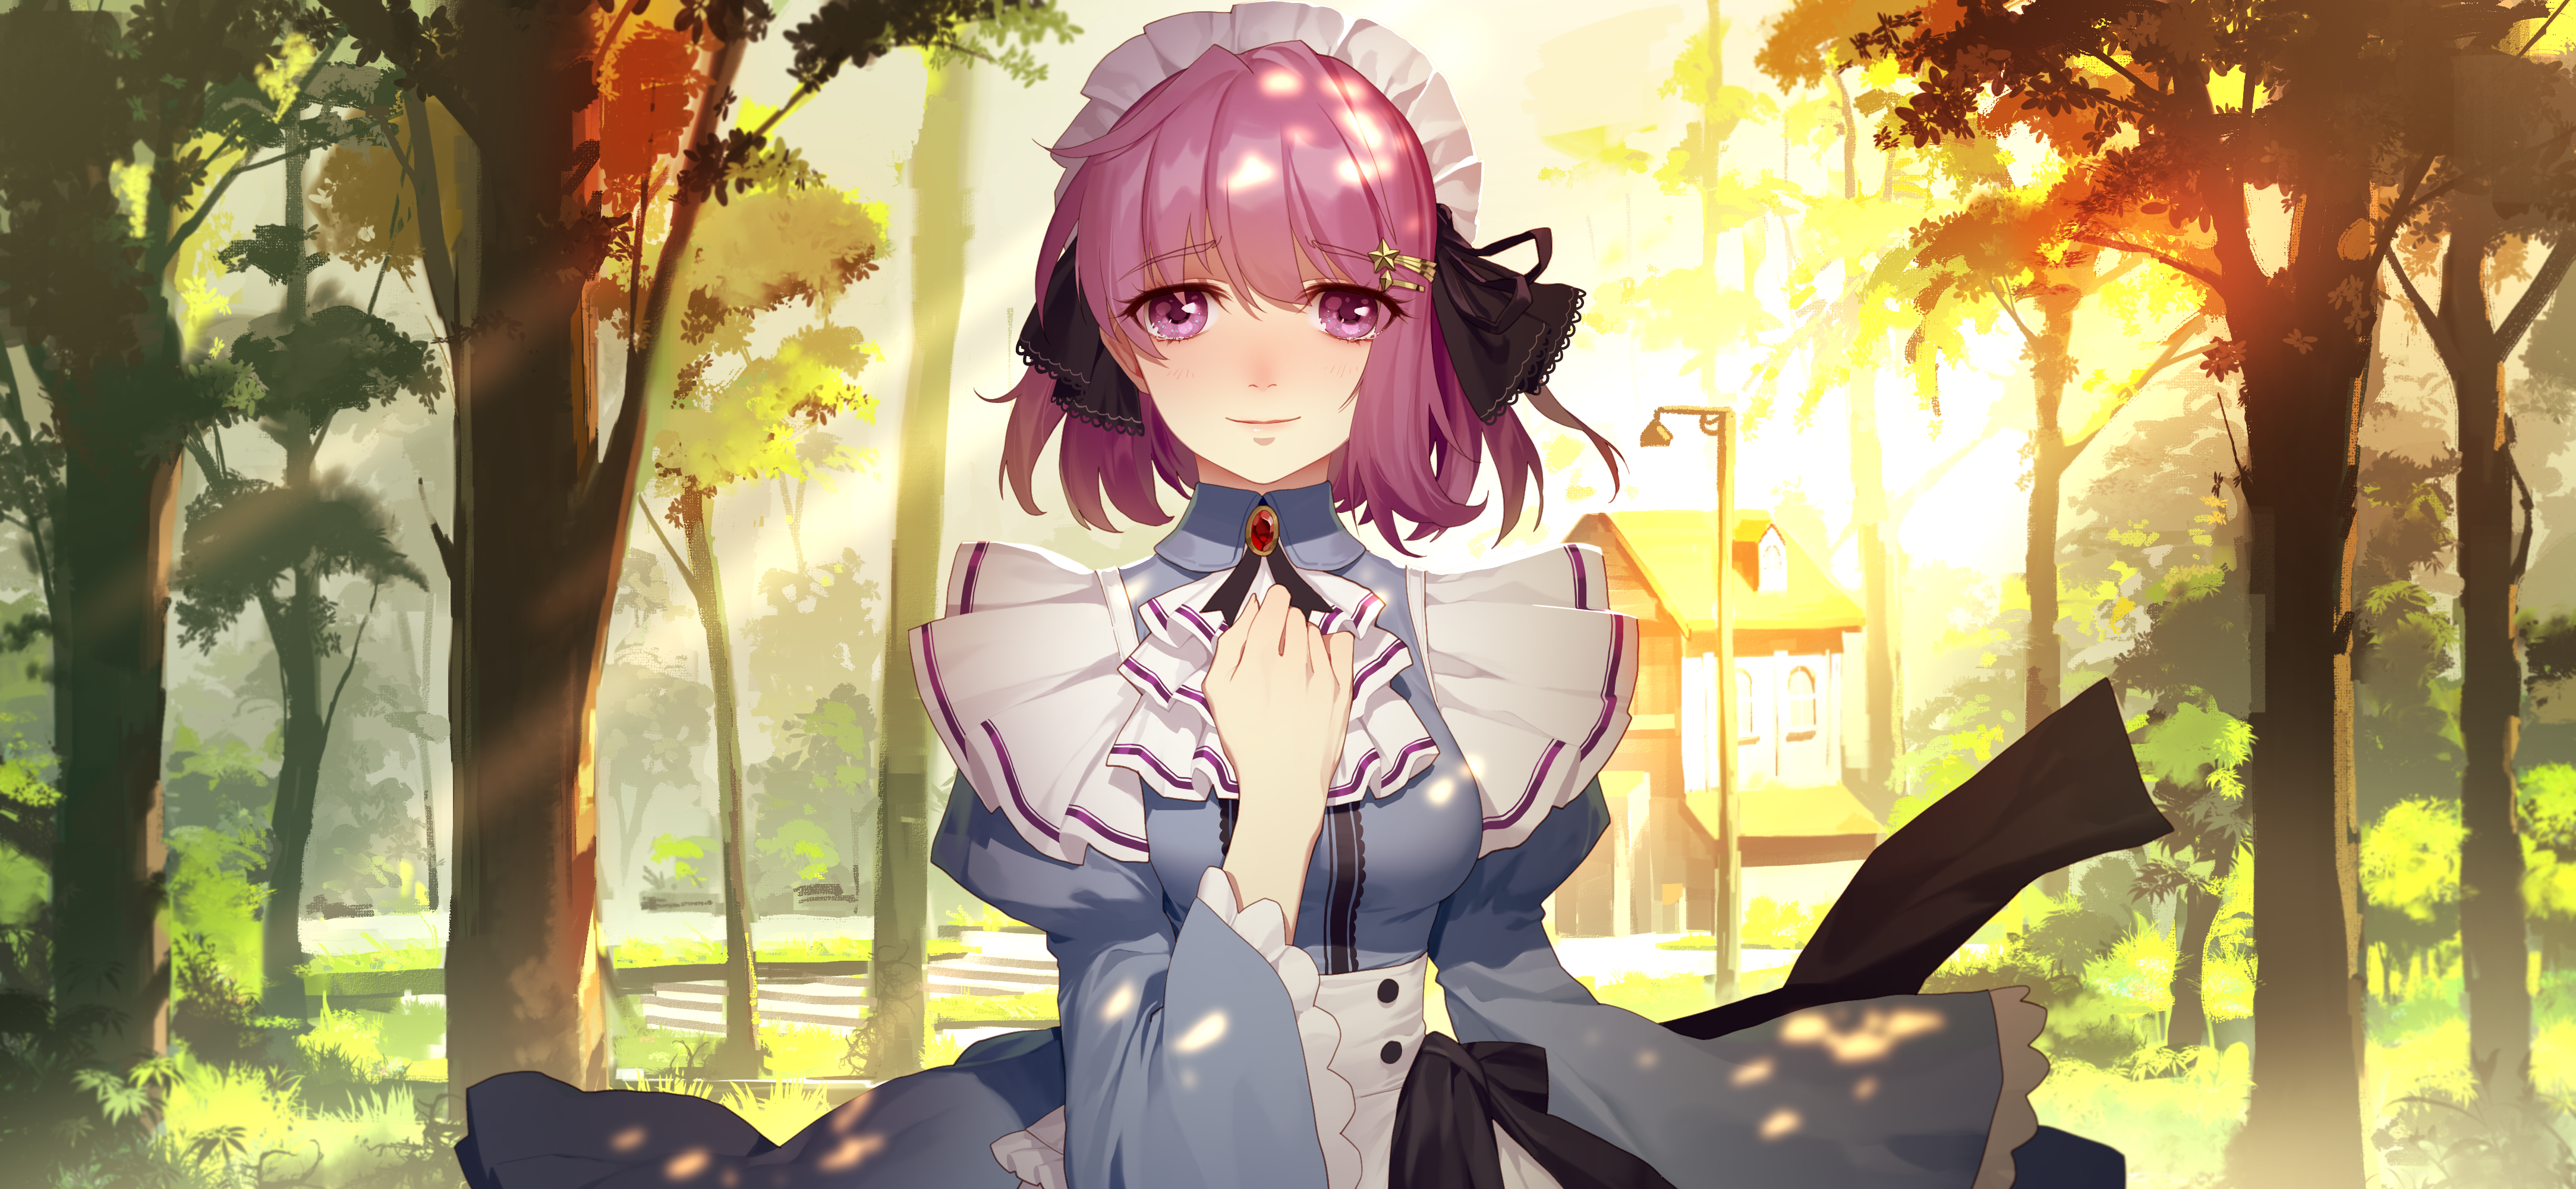 Anime 4334x2000 anime girls original characters purple hair purple eyes tears smiling dress maid maid outfit outdoors forest trees house street light environment artwork digital art illustration drawing painting 2D Thankstar404 portrait anime